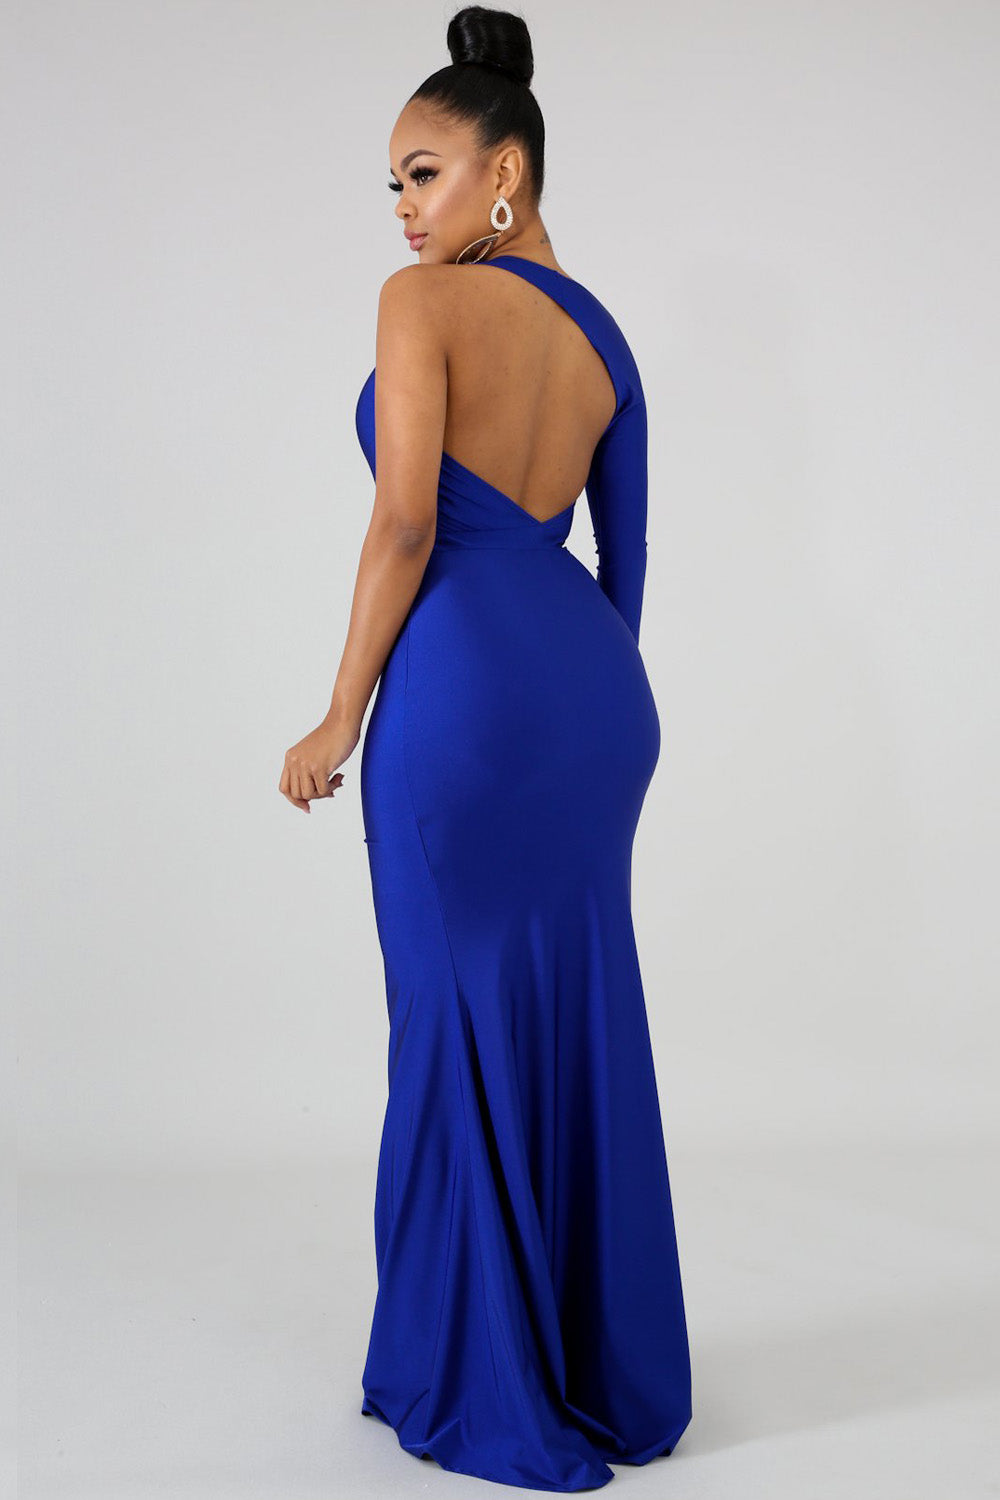 goPals full length royal blue dress with single long sleeve, open back and thigh high slit. 